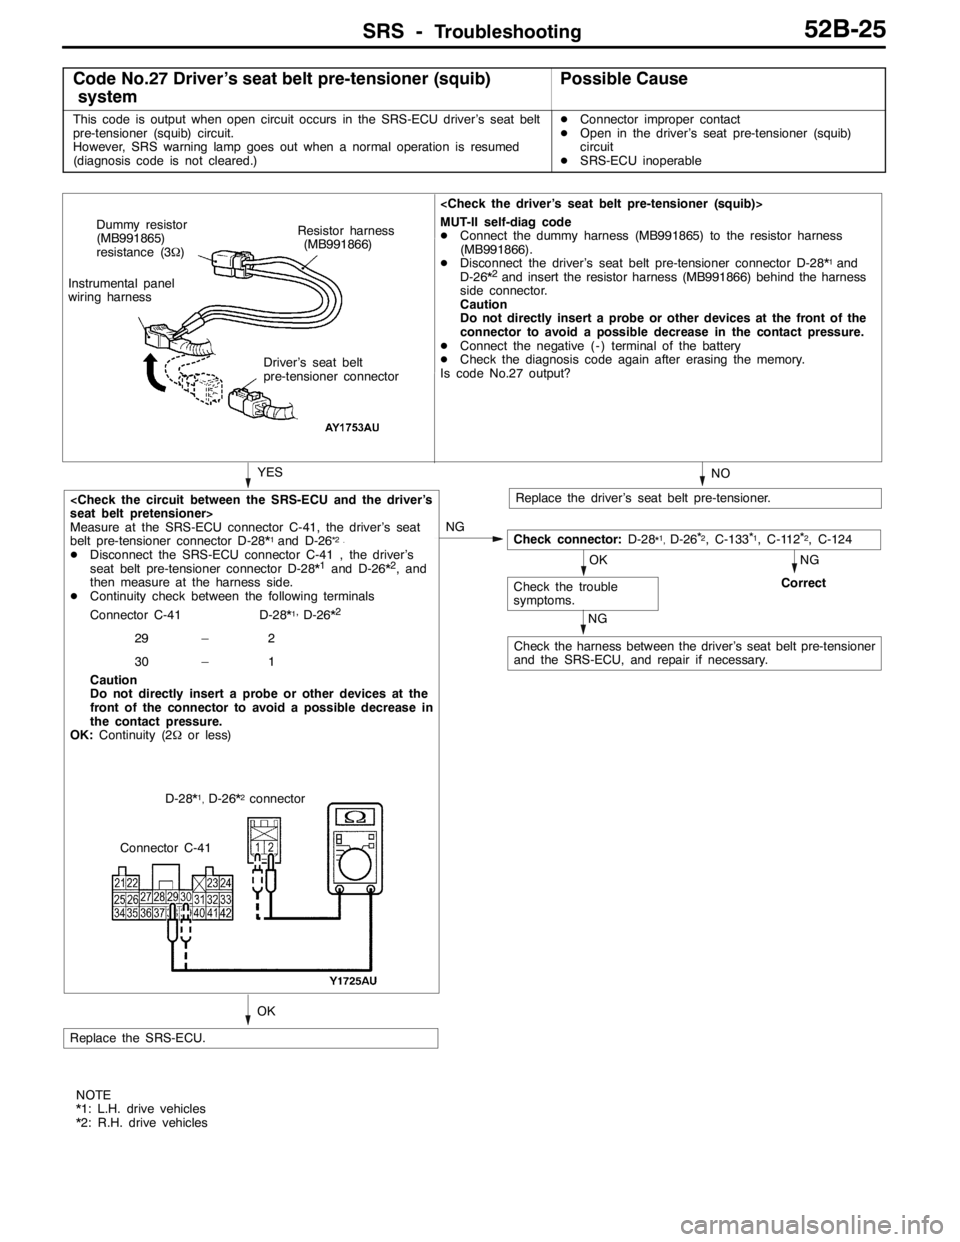 MITSUBISHI LANCER EVOLUTION 2007  Service Repair Manual SRS -Troubleshooting52B-25
Code No.27 Driver’s seat belt pre-tensioner (squib)
systemPossible Cause
This code is output when open circuit occurs in the SRS-ECU driver’s seat belt
pre-tensioner (sq